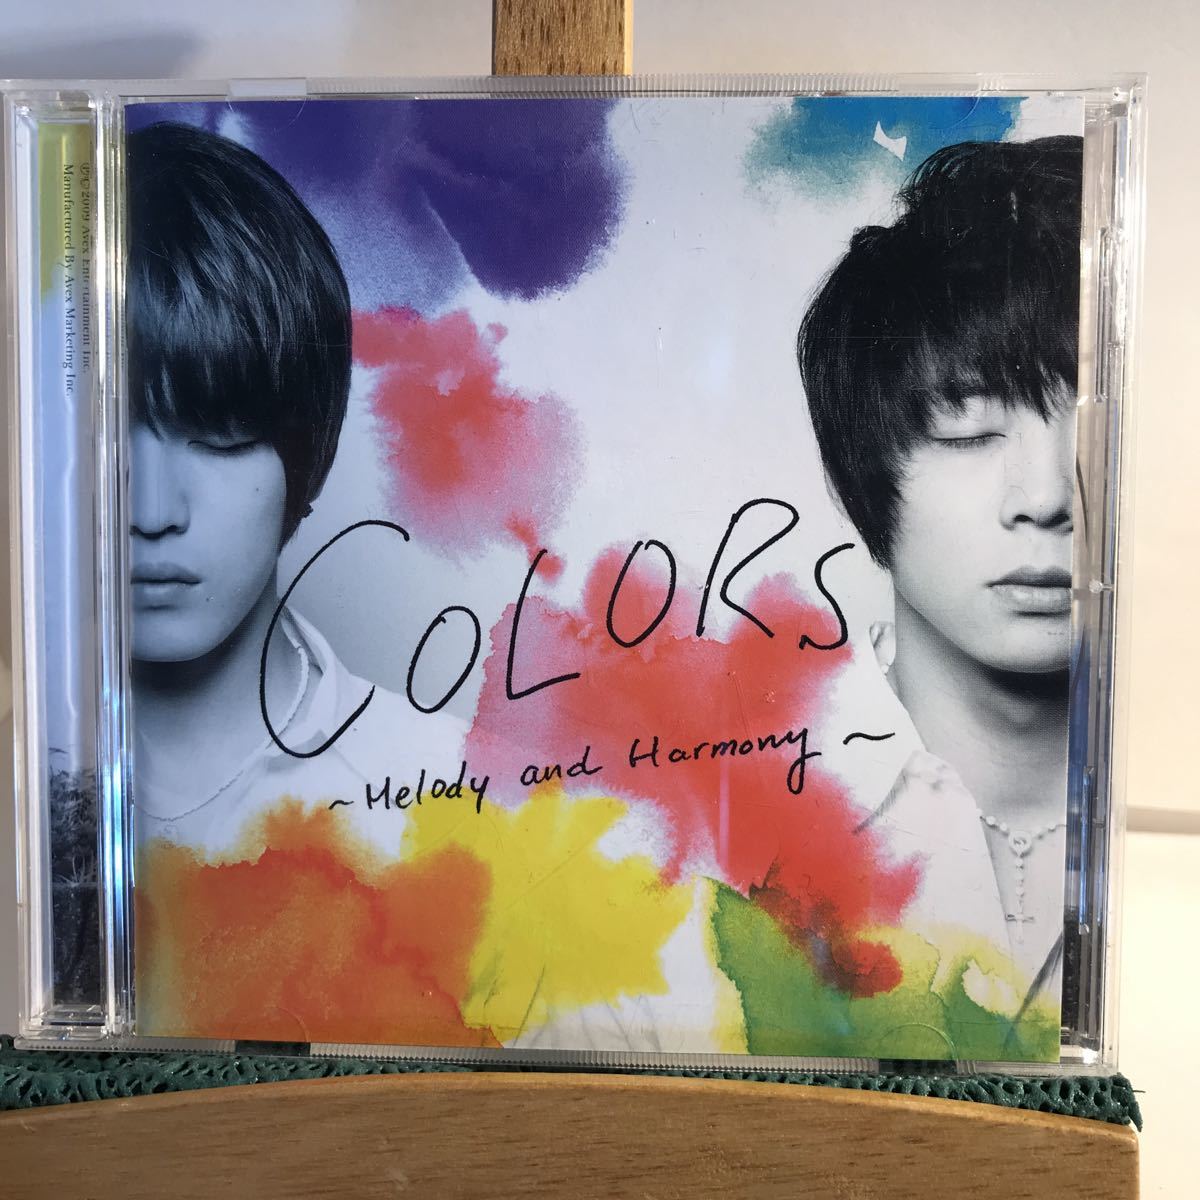 Jejung Yuchun from 東方神起 買い保障できる Colors ～Melody Harmony～ RZCD-46373 値下げ Sheler 新品同様 and